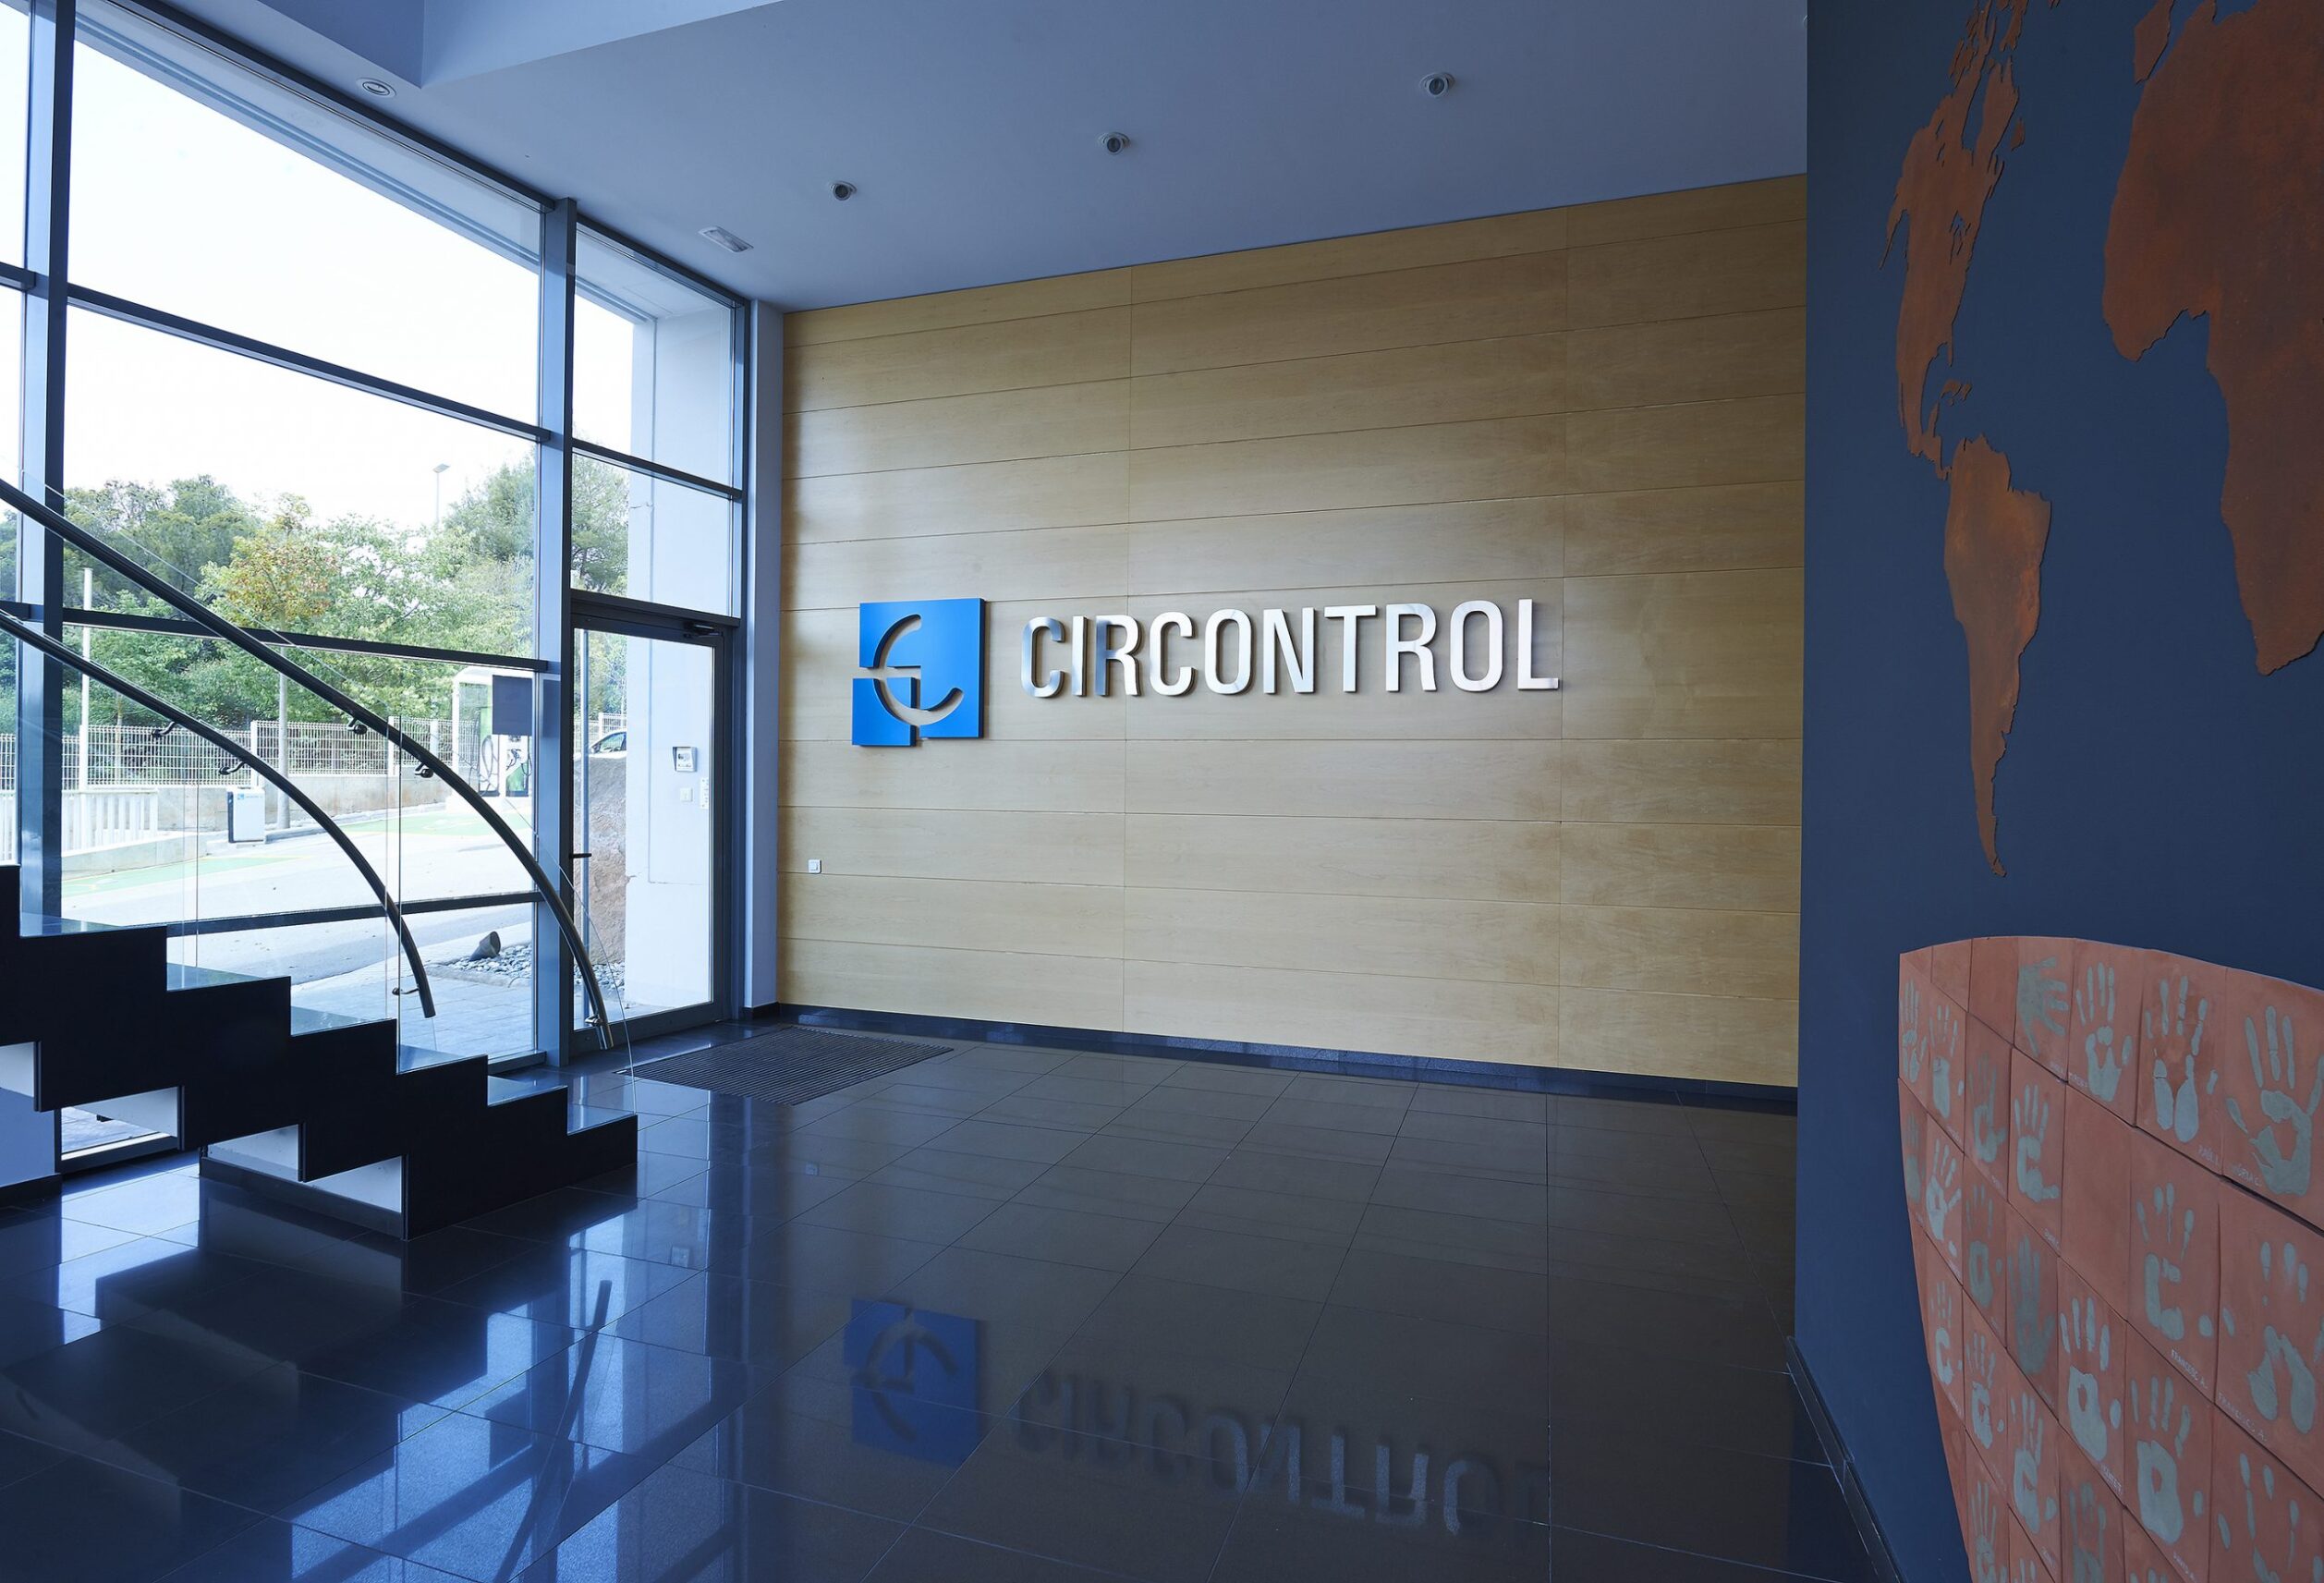 Circontrol organizes its activity in two independent divisions, CirPark focused on the efficient parking and CirCarLife in electric vehicle charging solutions